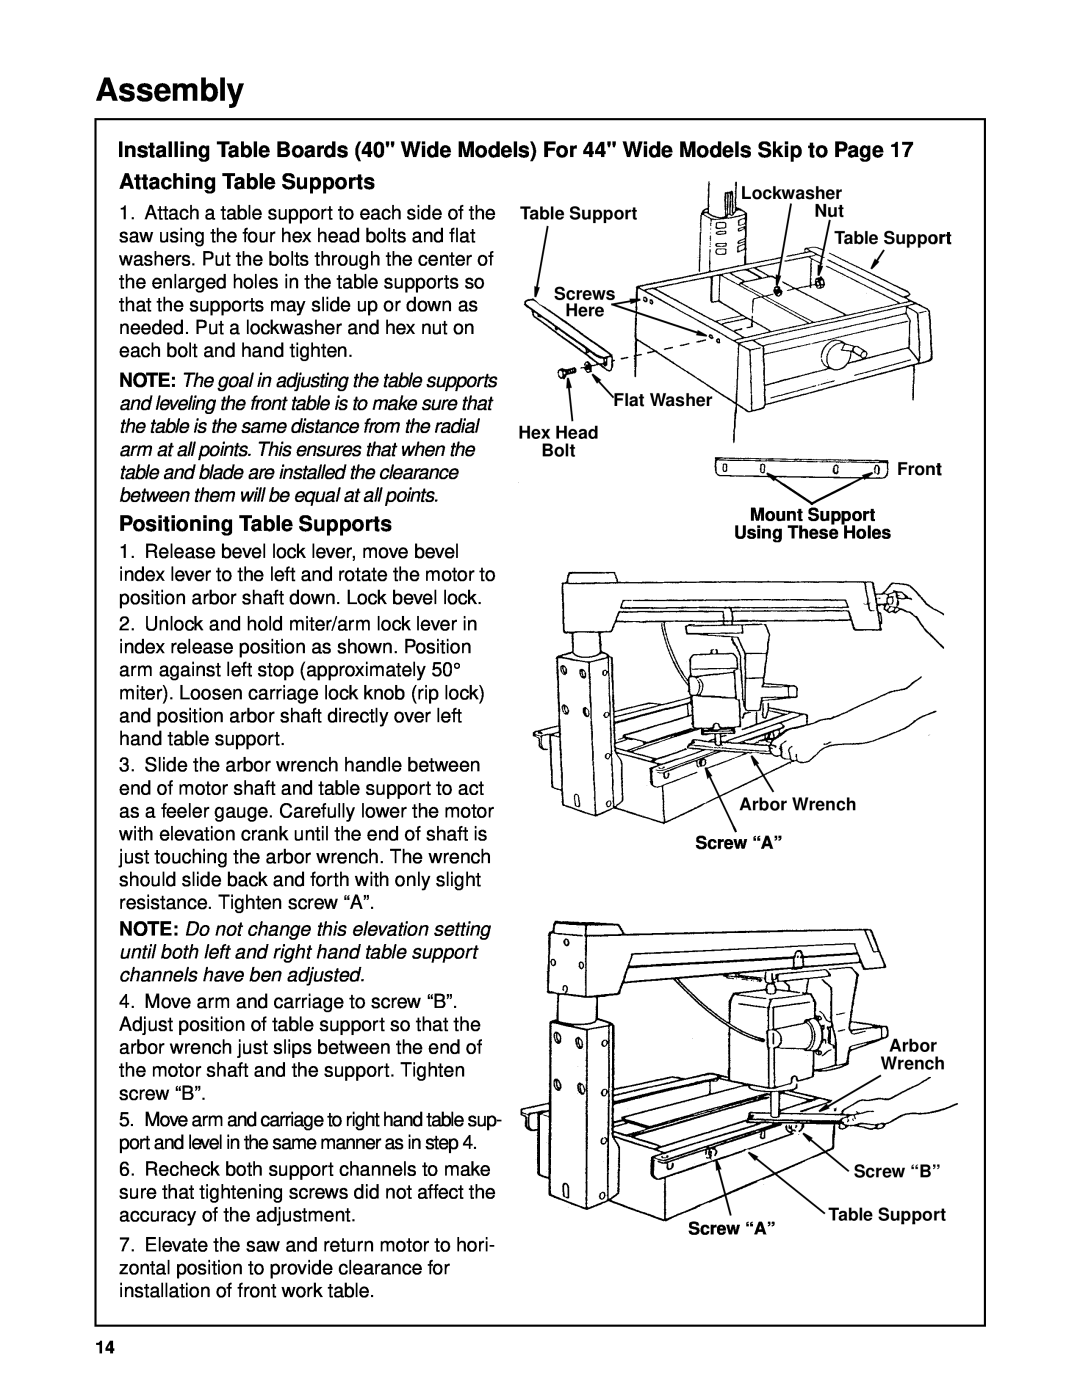 Craftsman 509399, 509398 owner manual Attaching Table Supports, Positioning Table Supports, Assembly 